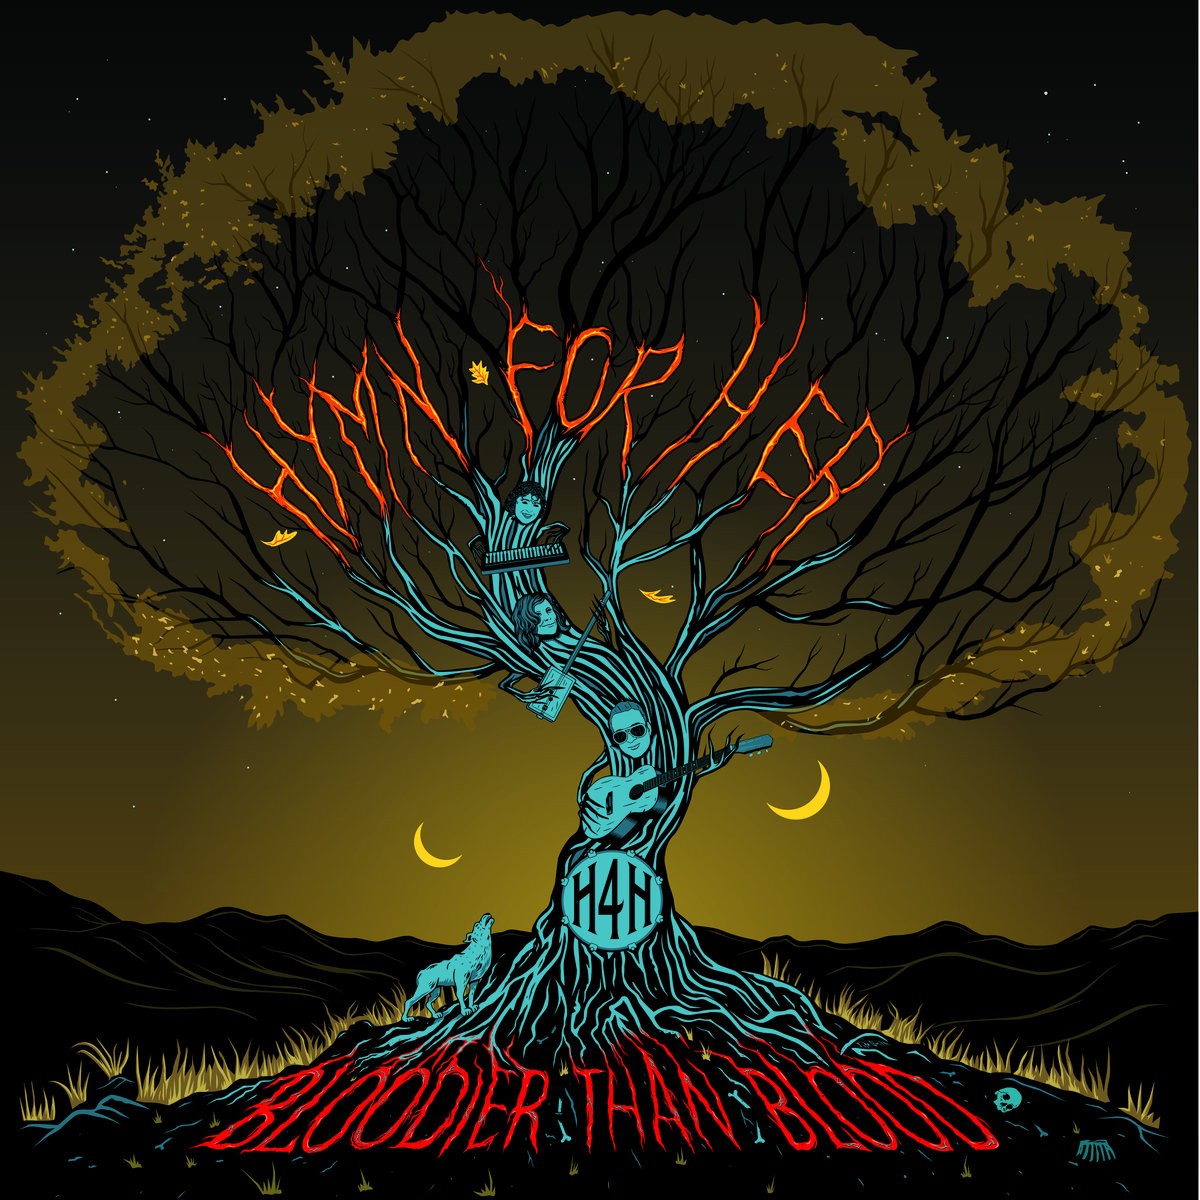 Hymn For Her – Bloodier Than Blood